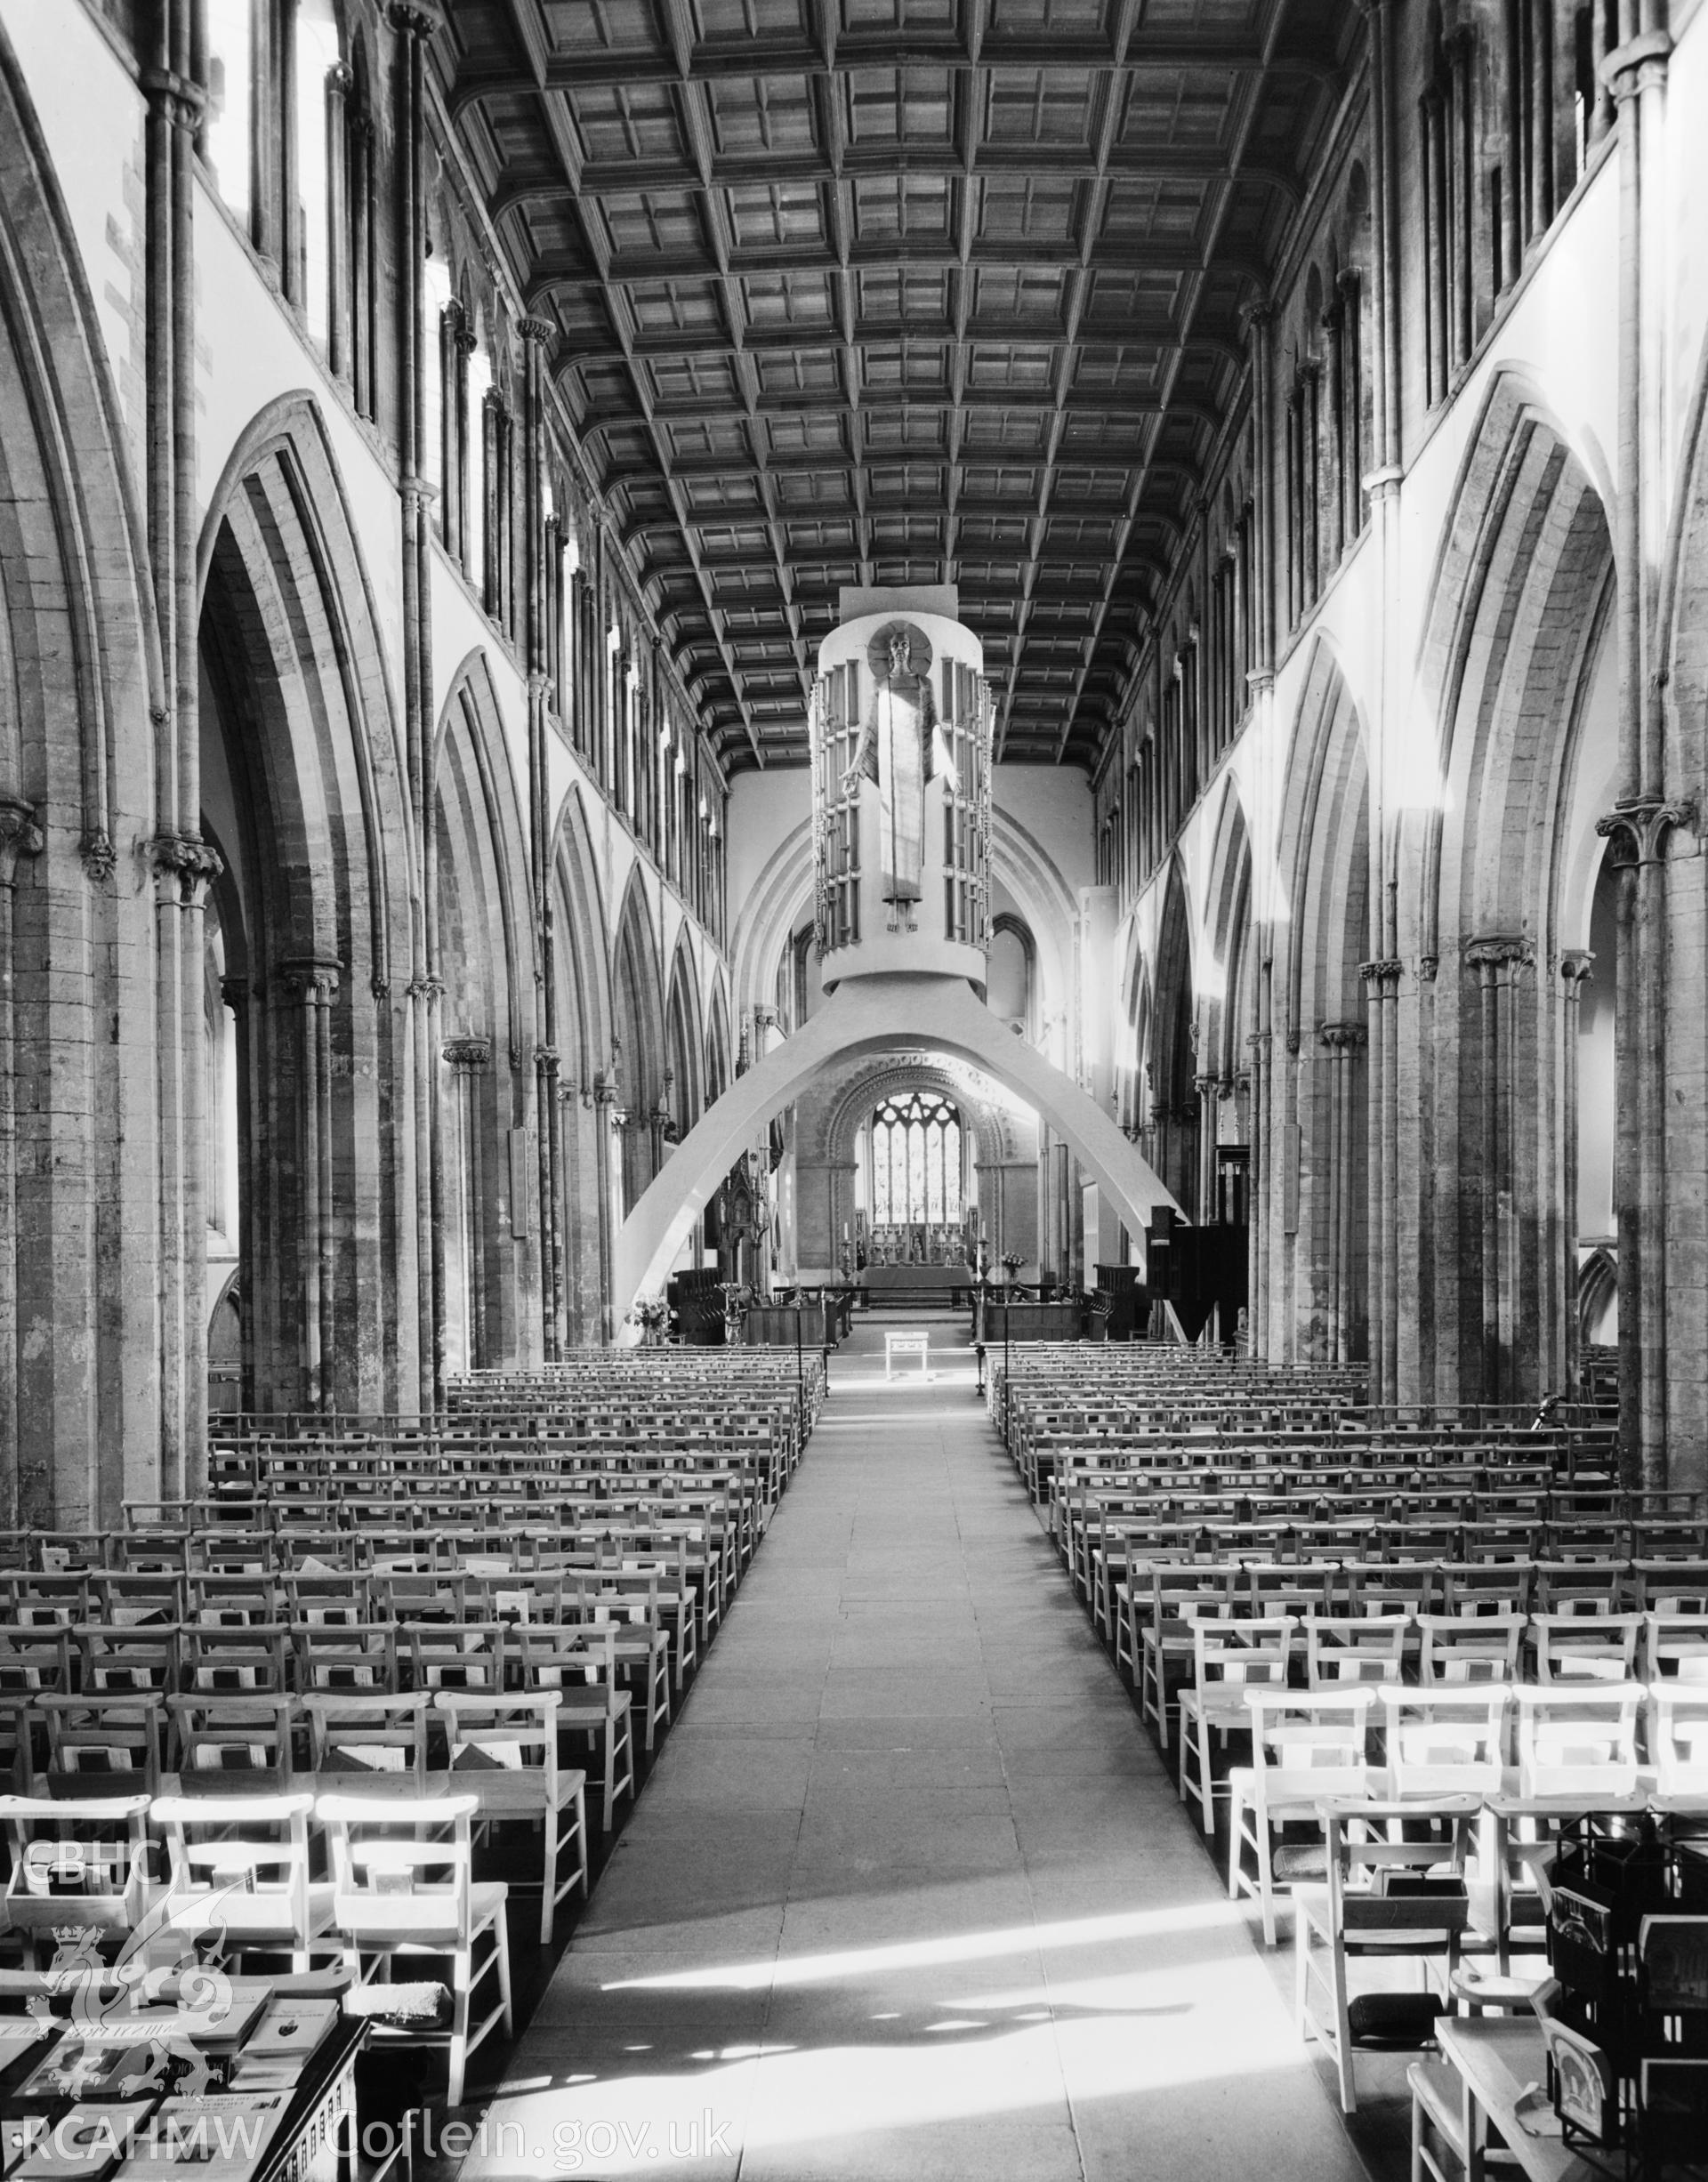 1 b/w print showing interior view of Llandaff Cathedral, Cardiff, sincluding Epstein's 'Risen Christ' arch; collated by the former Central Office of Information.